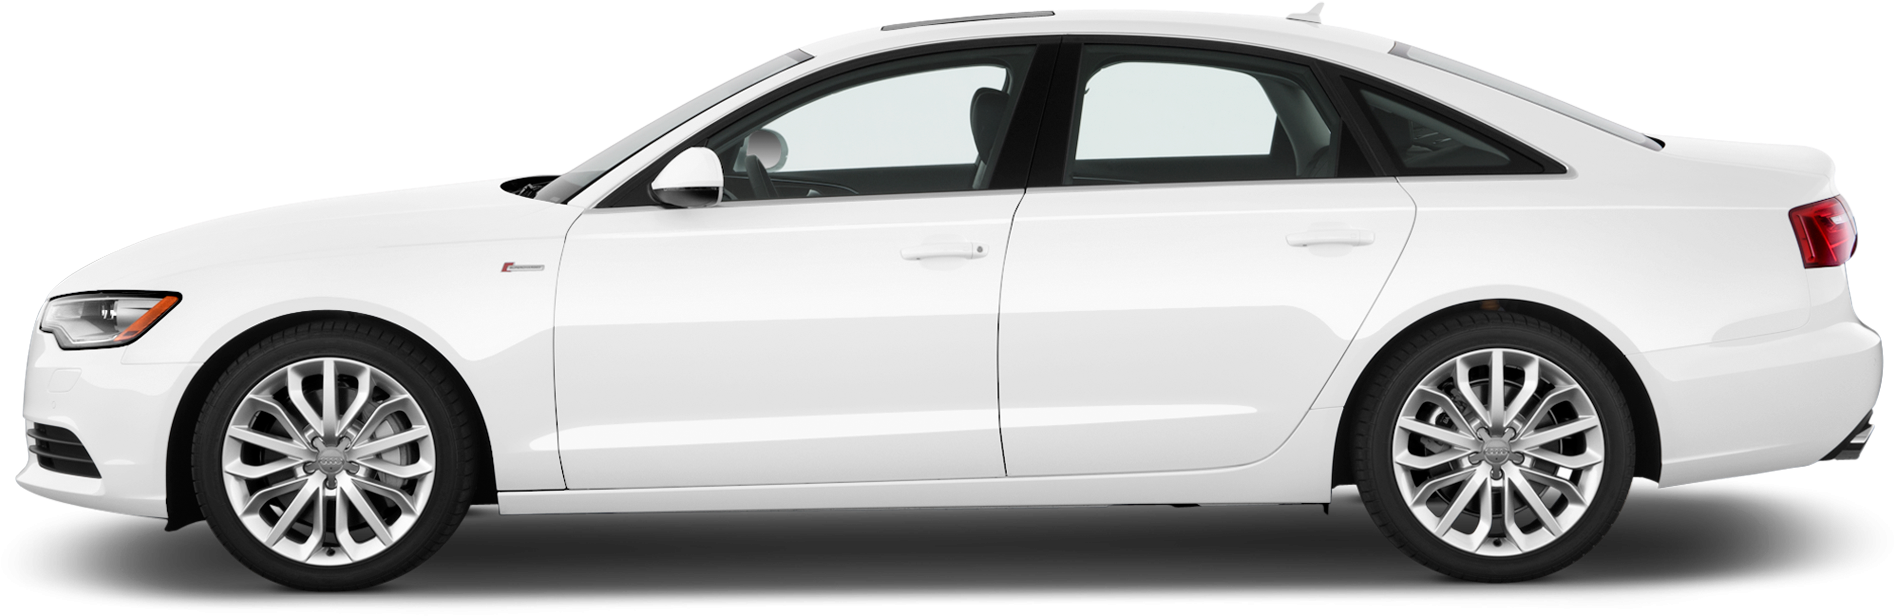 White Audi A6 PNG High-Quality Image